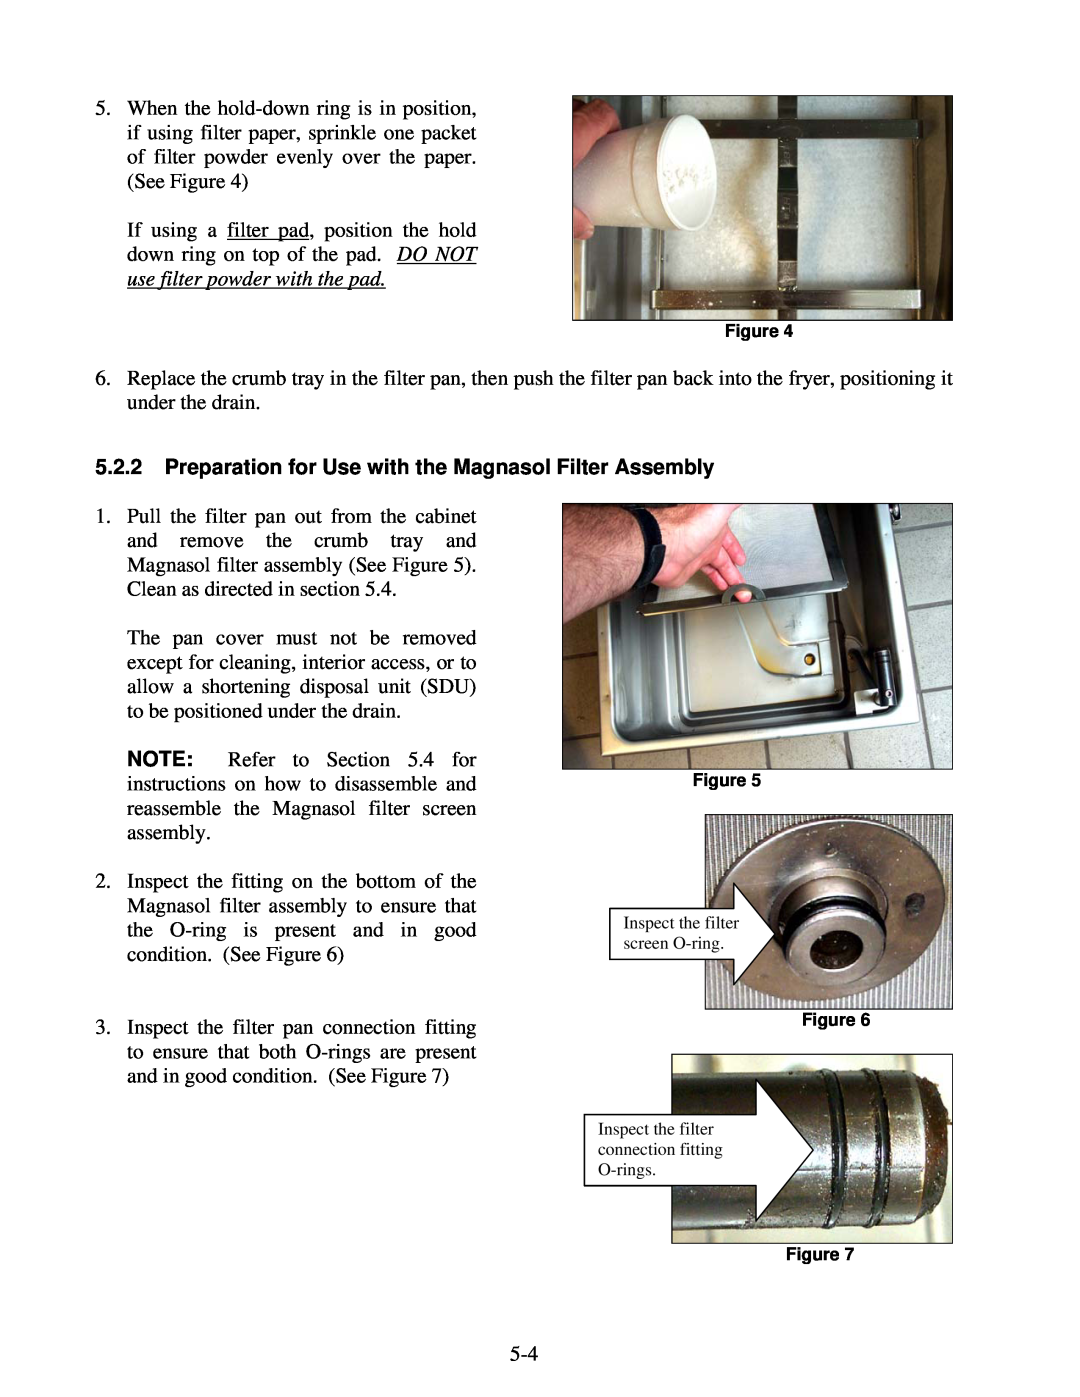 Frymaster 8196339 operation manual Preparation for Use with the Magnasol Filter Assembly 